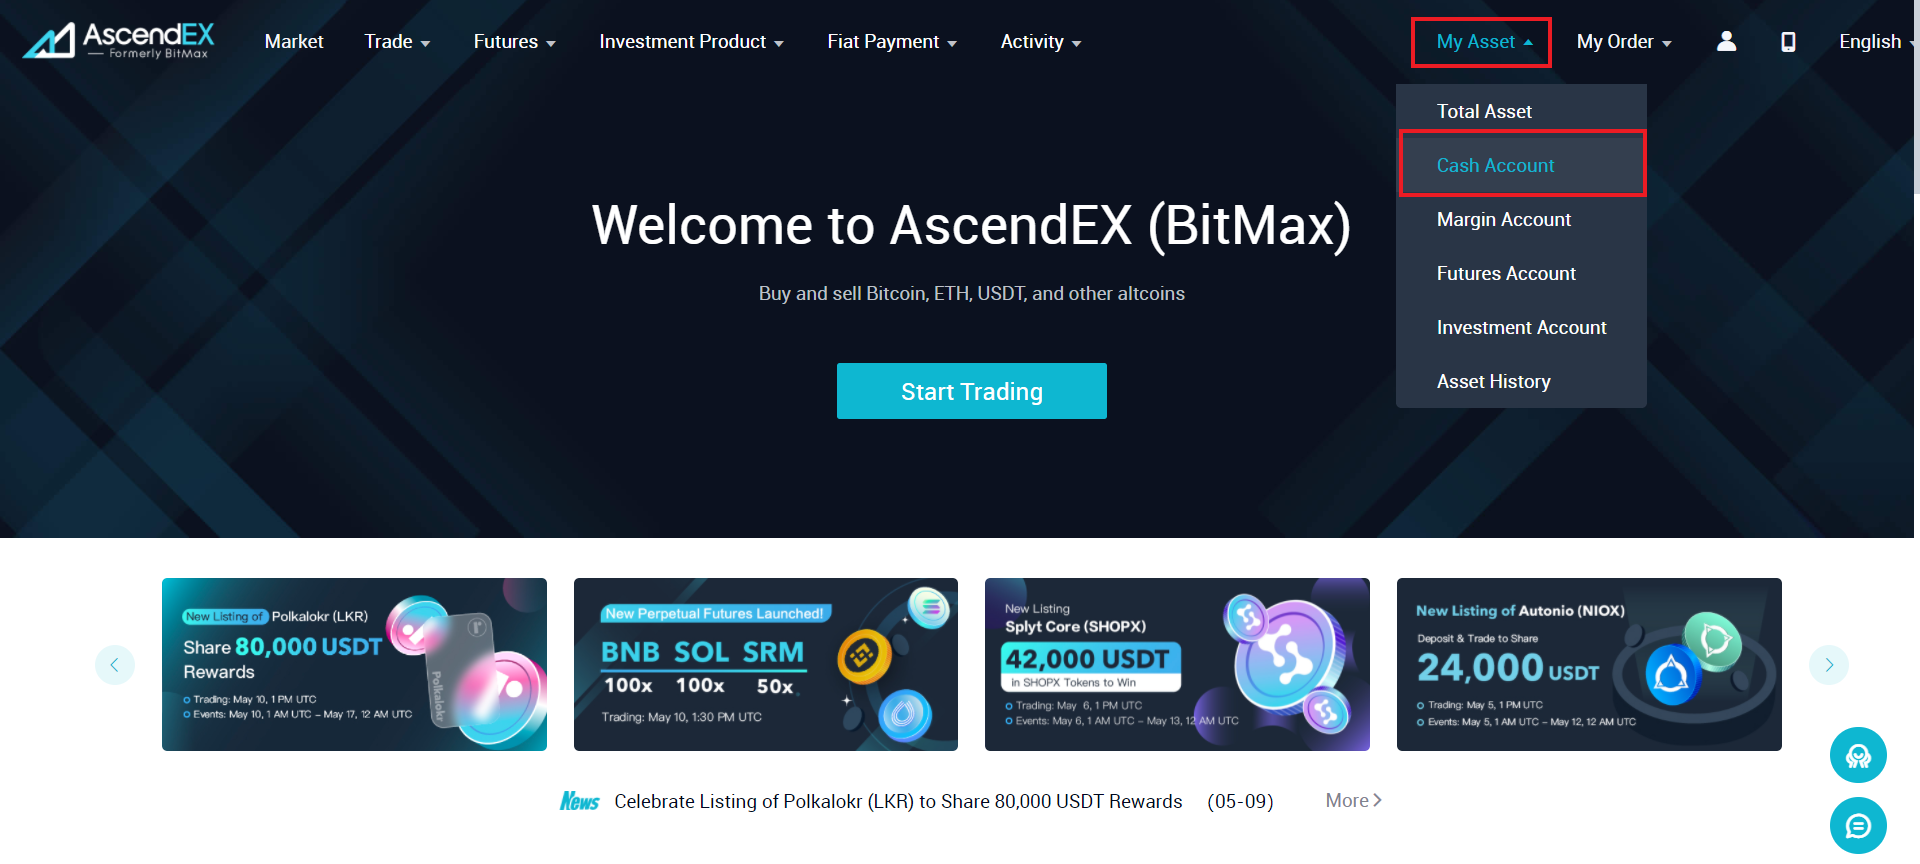 Using AscendEX (BitMax) to exit funds from Matic into ...